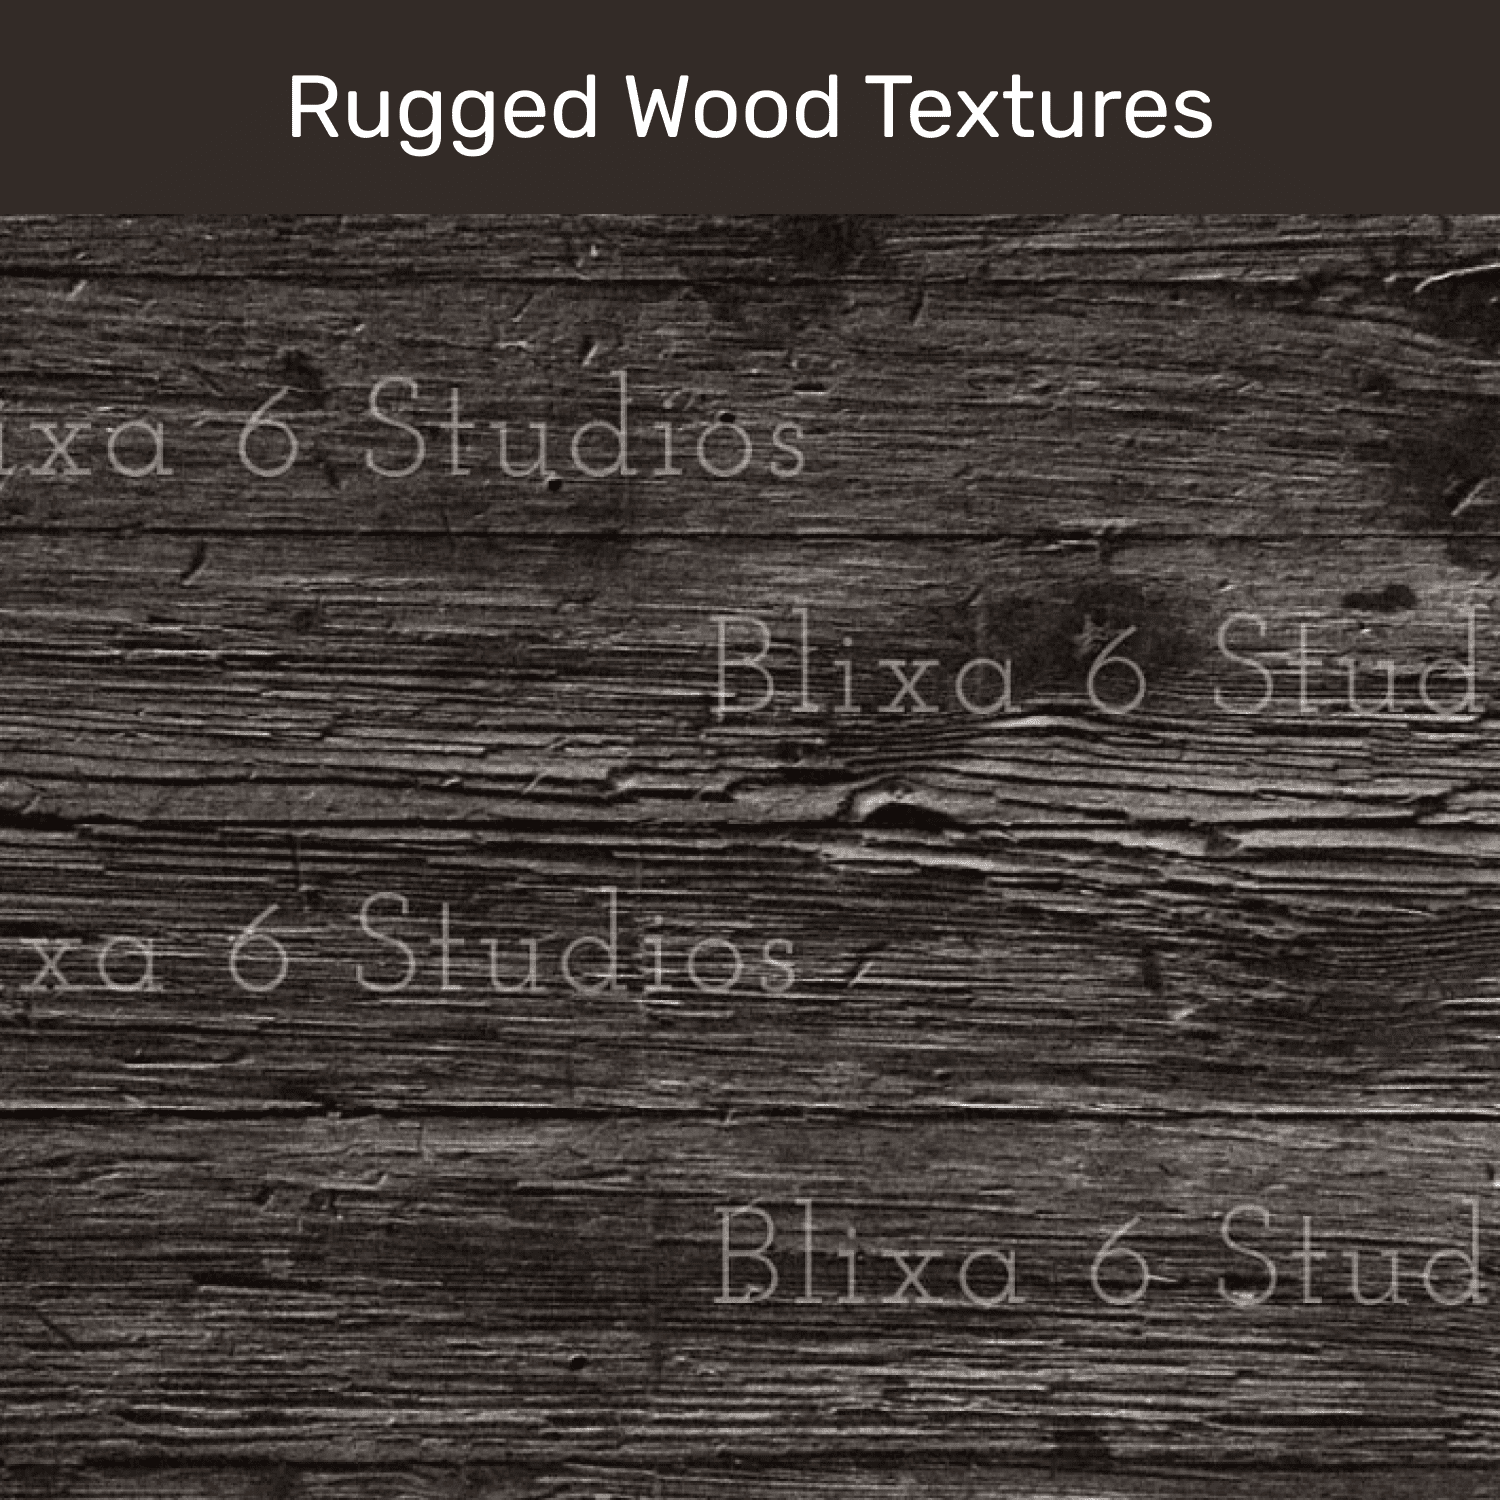 Rugged Wood Textures cover.